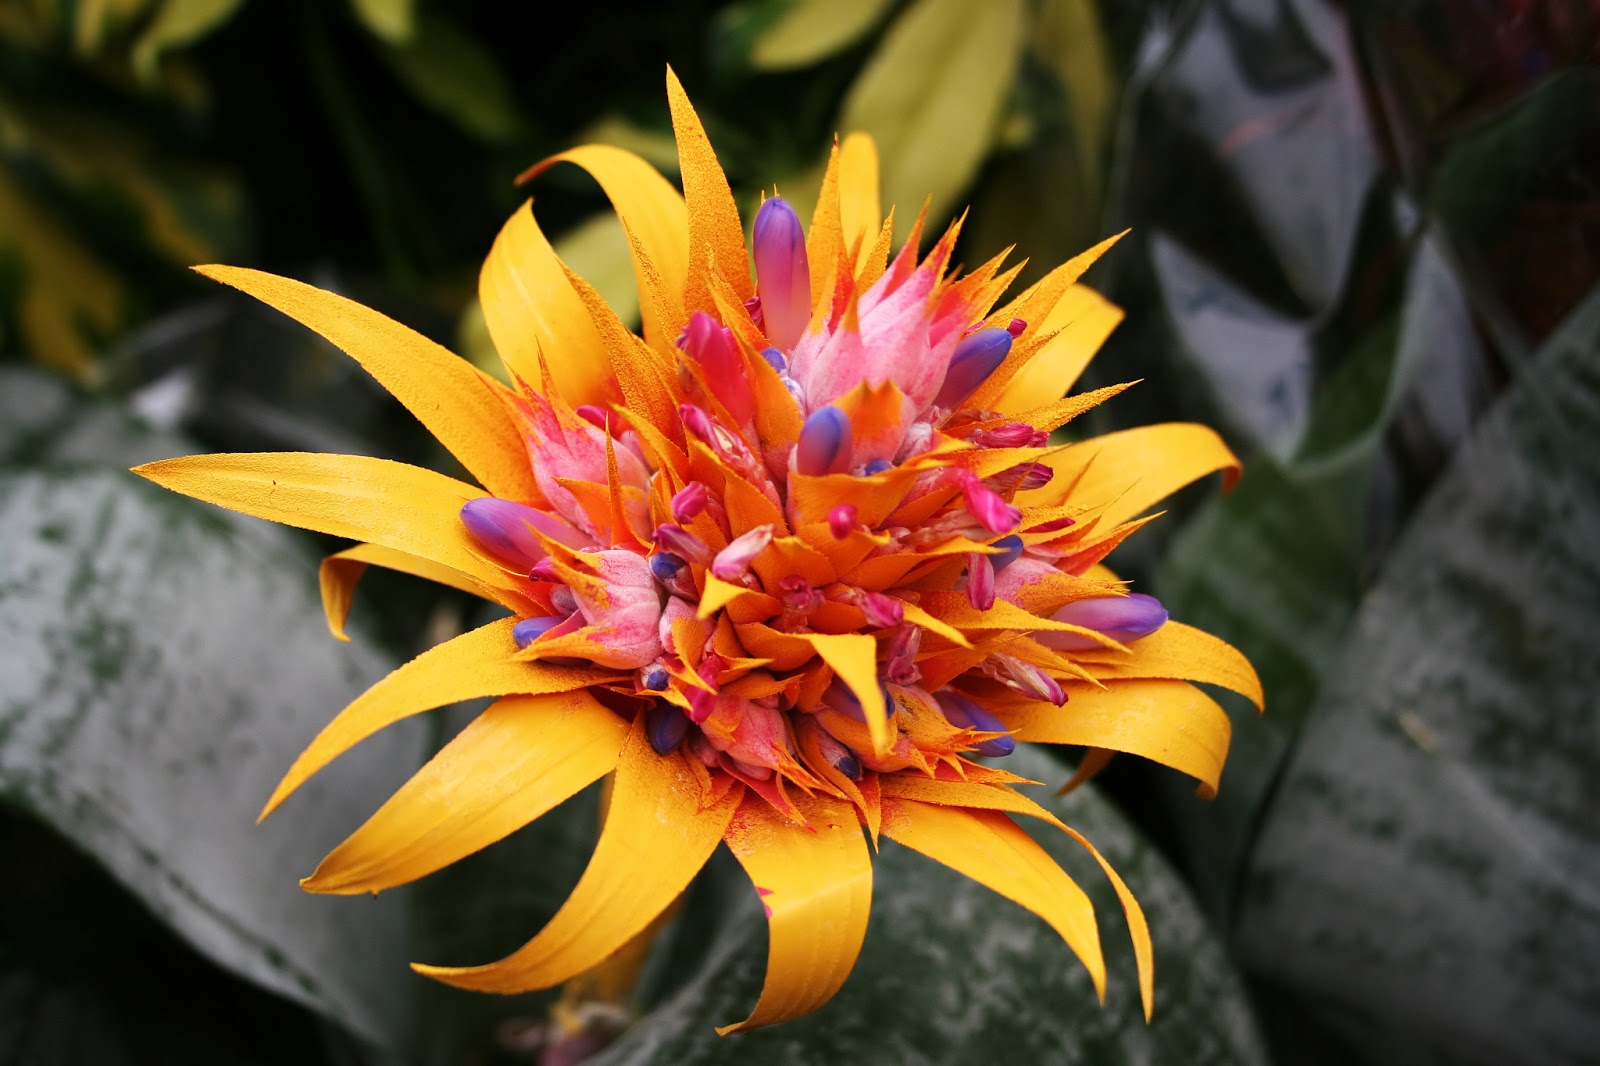 Exotic tropical flowers photos - Just for Sharing